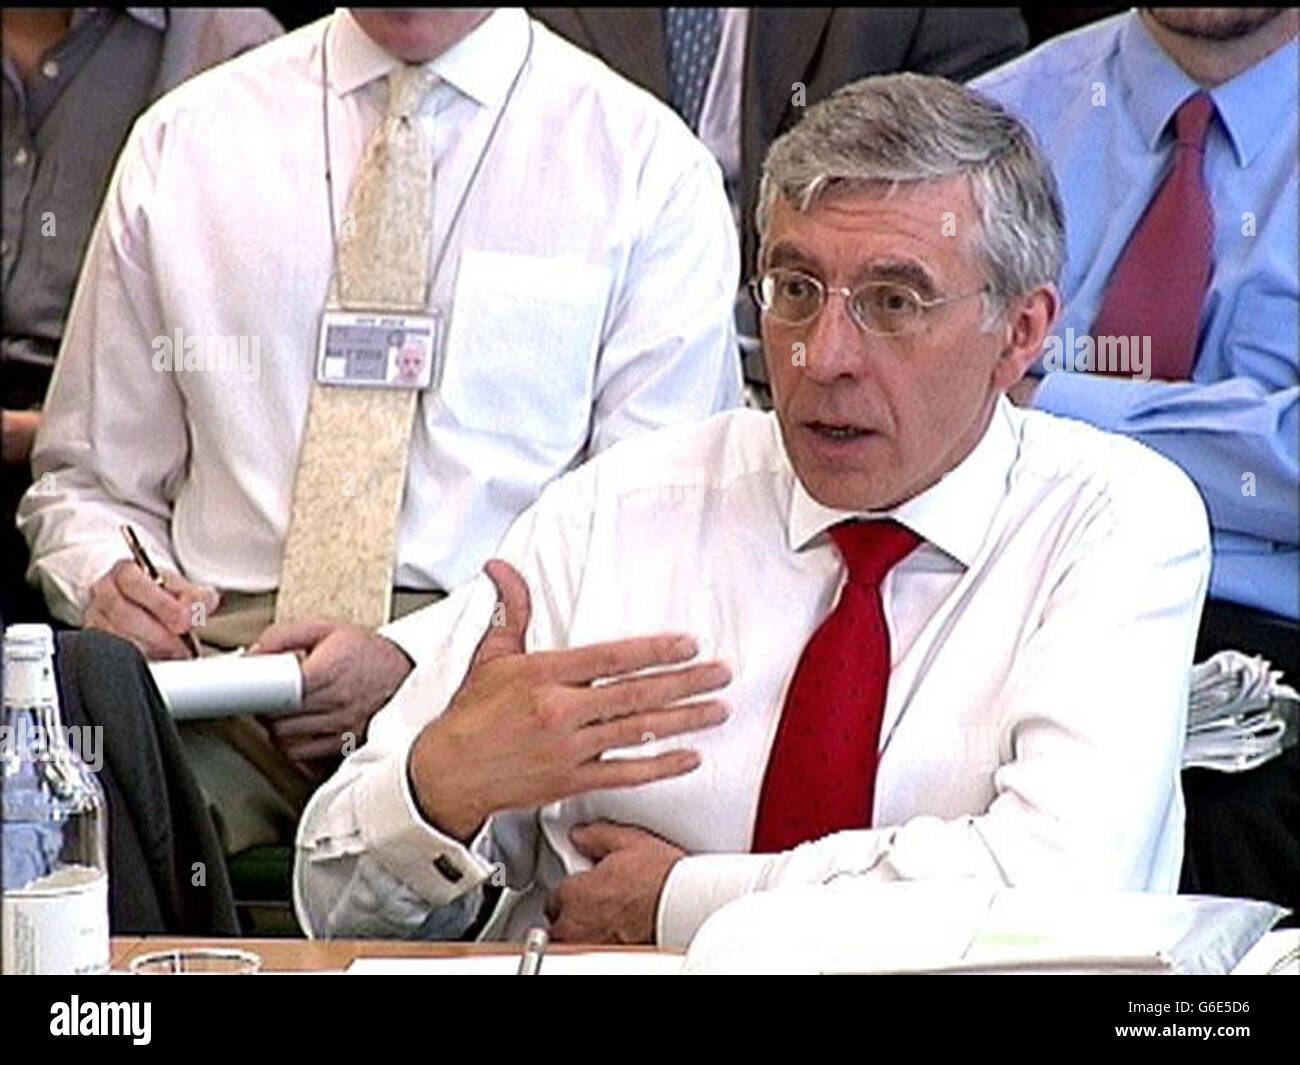 Foreign Secretary Jack Straw gives evidence to the Foreign Affairs Select Committee, regarding Downing Street's second dossier on Iraq's weapons of mass destruction. Straw told MPs: ' Of course it has been an embarrassment for the Government and lessons have been learned.' Stock Photo